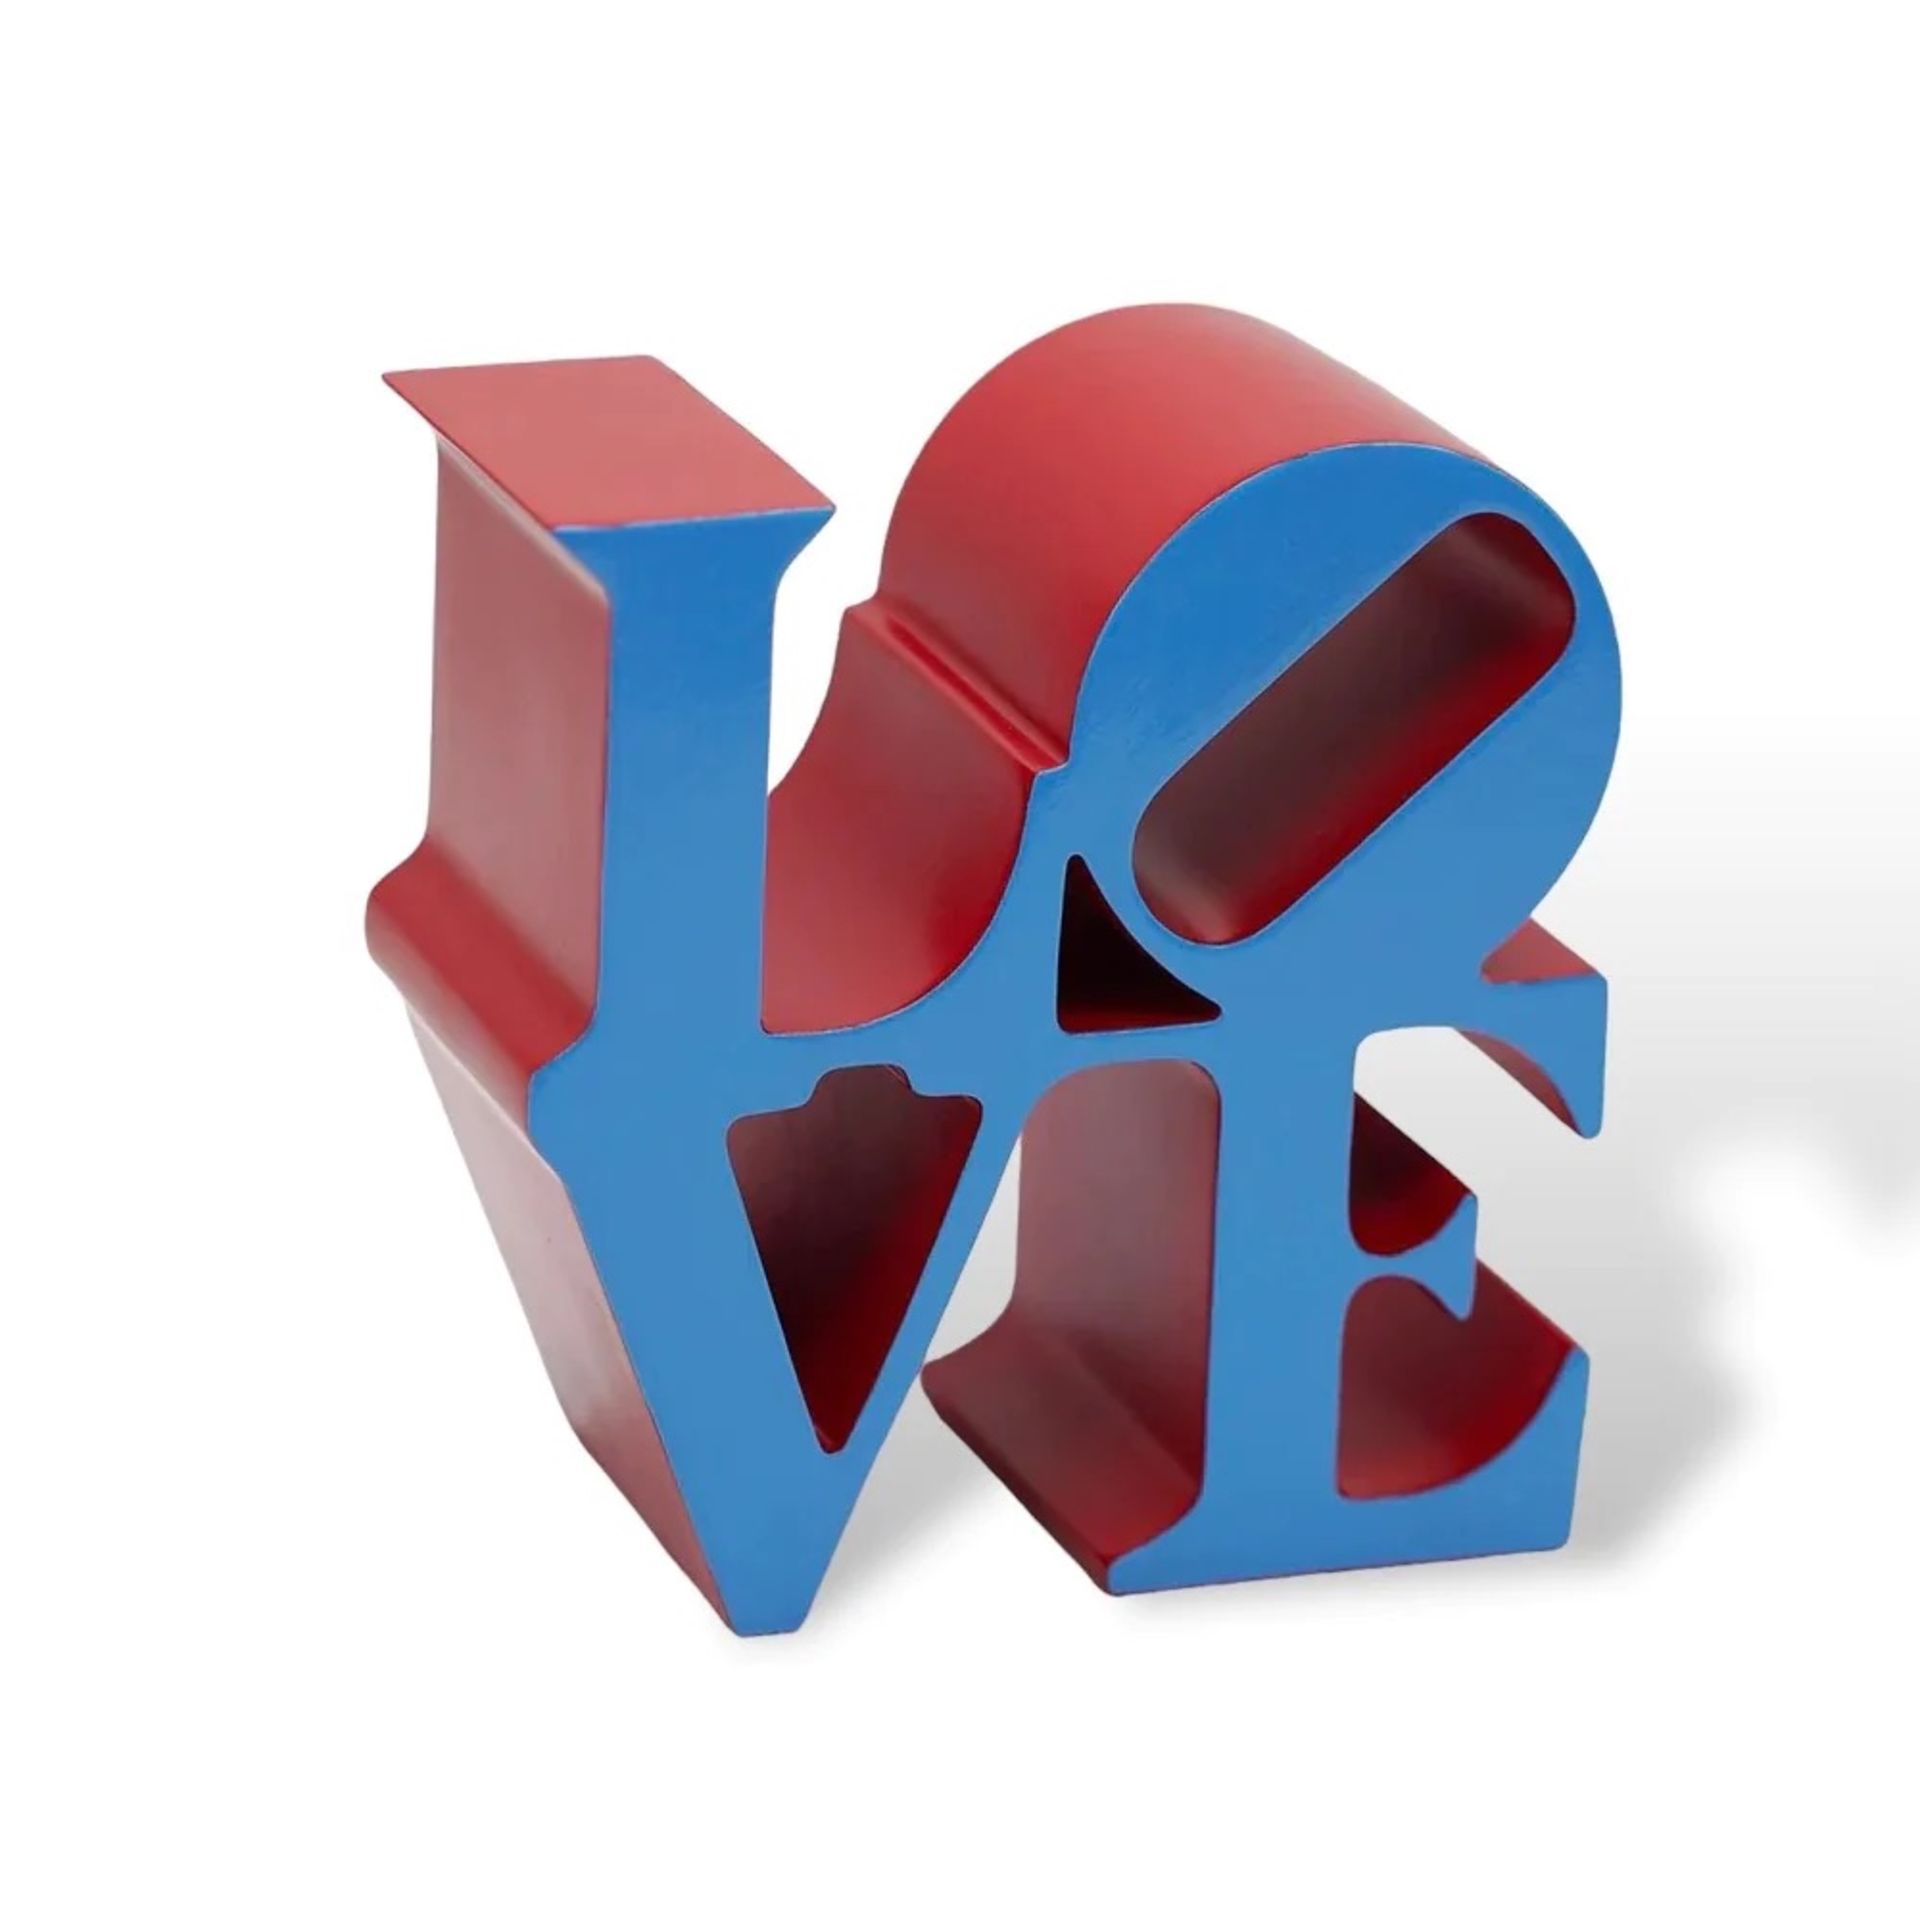 Robert Indiana, Love (Blue, Red)